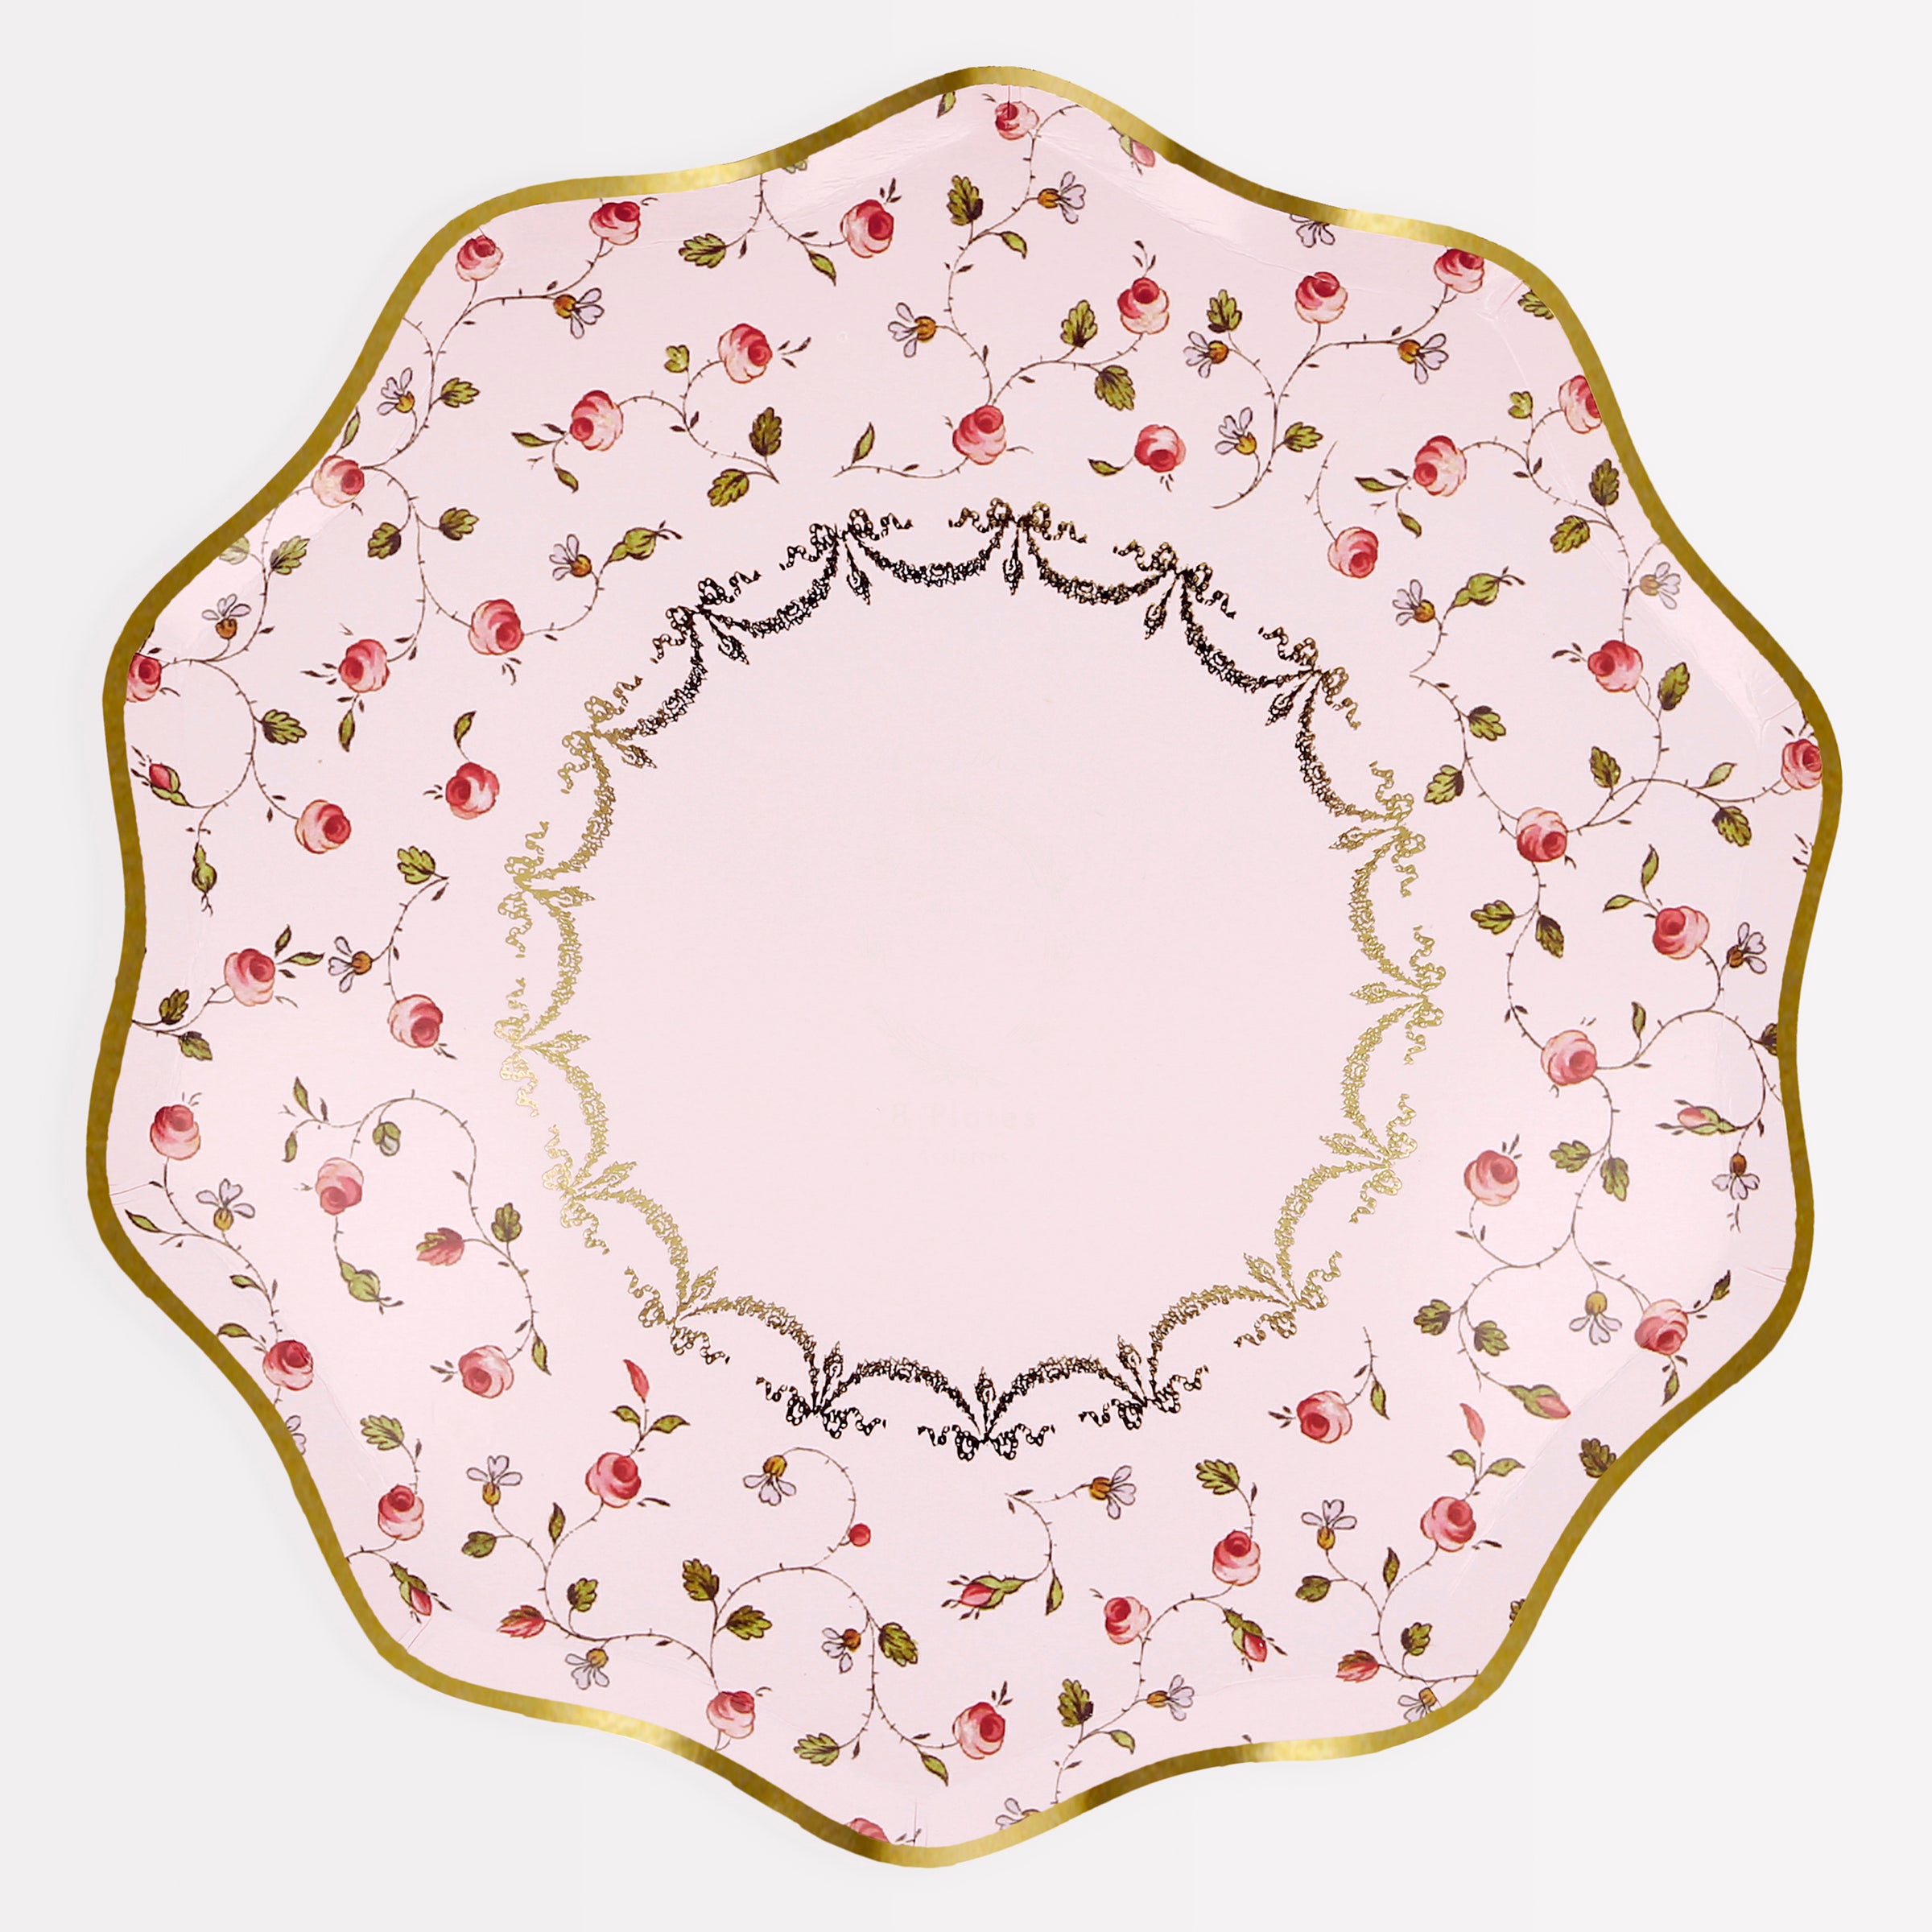 Our party plates, with soft pink and red, are perfect for a romantic dinner.